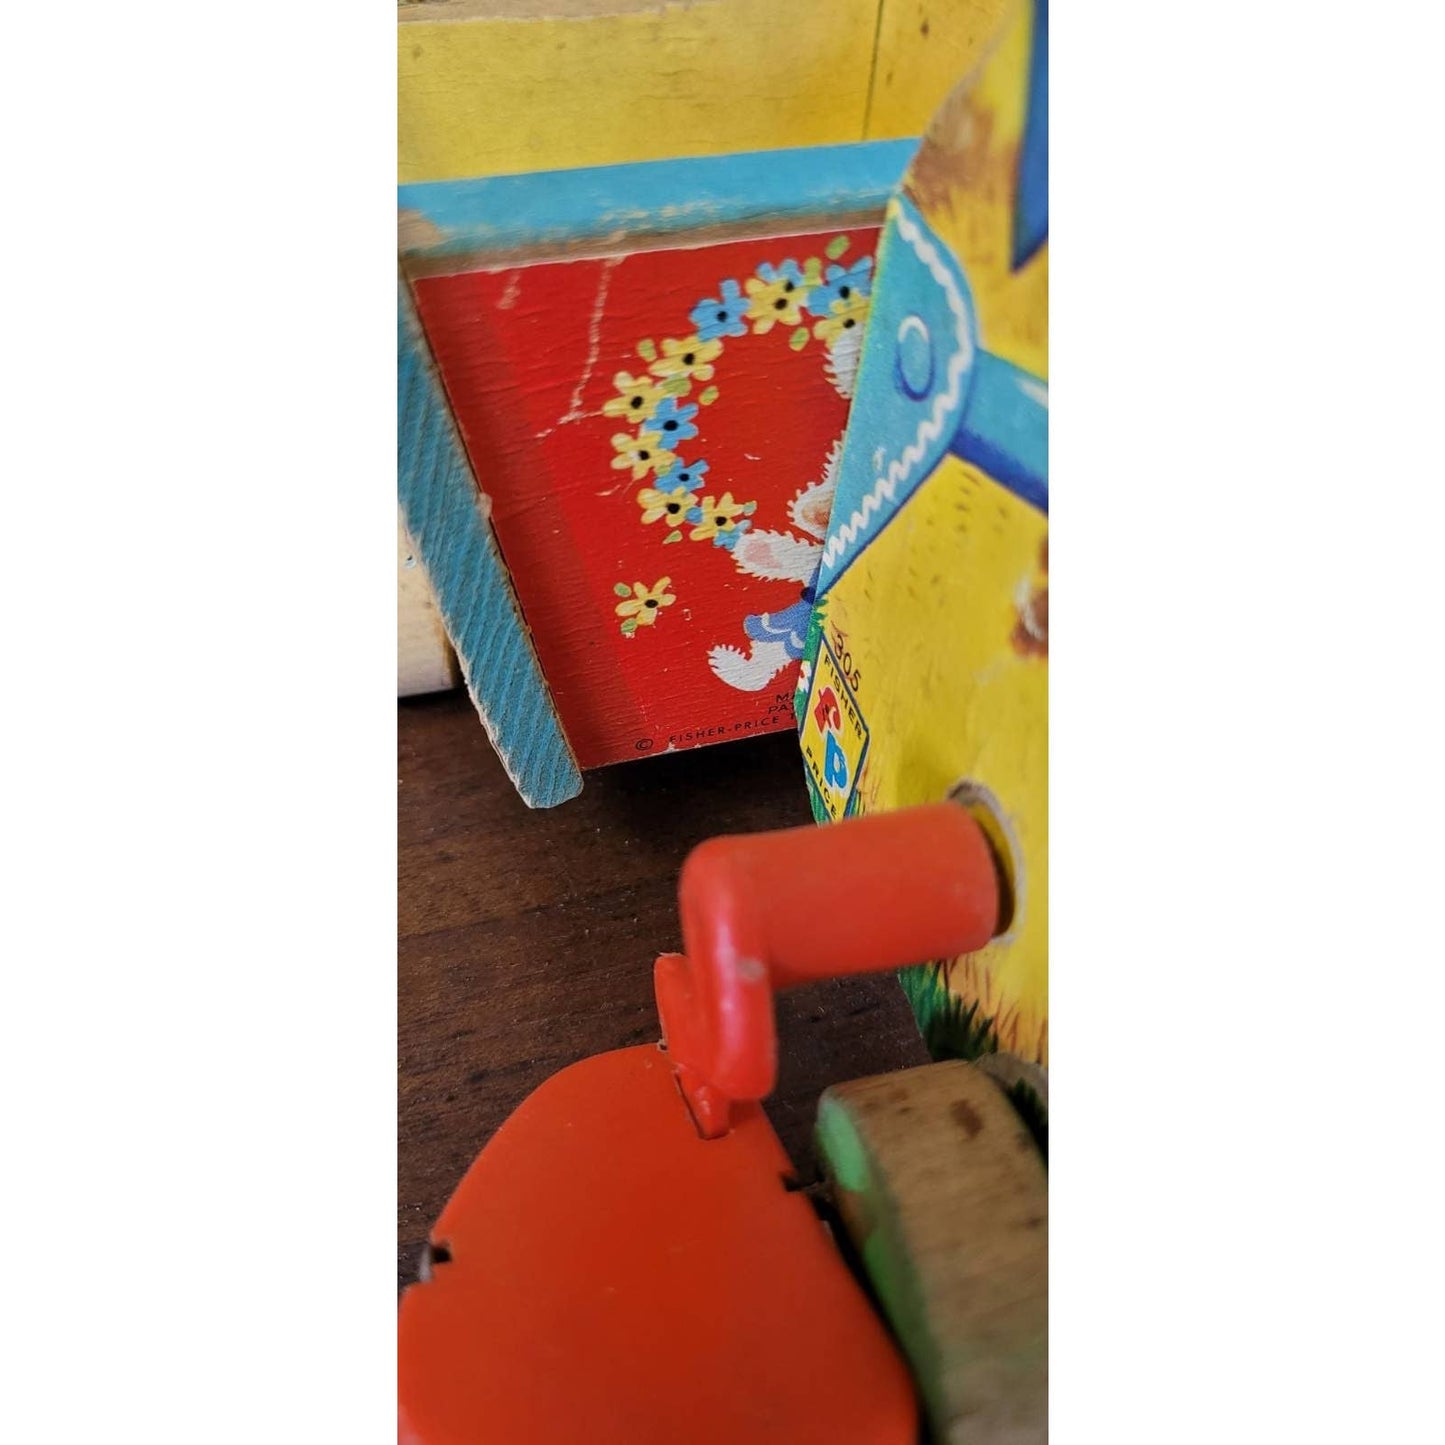 Vintage Fisher Price Chick & Cart